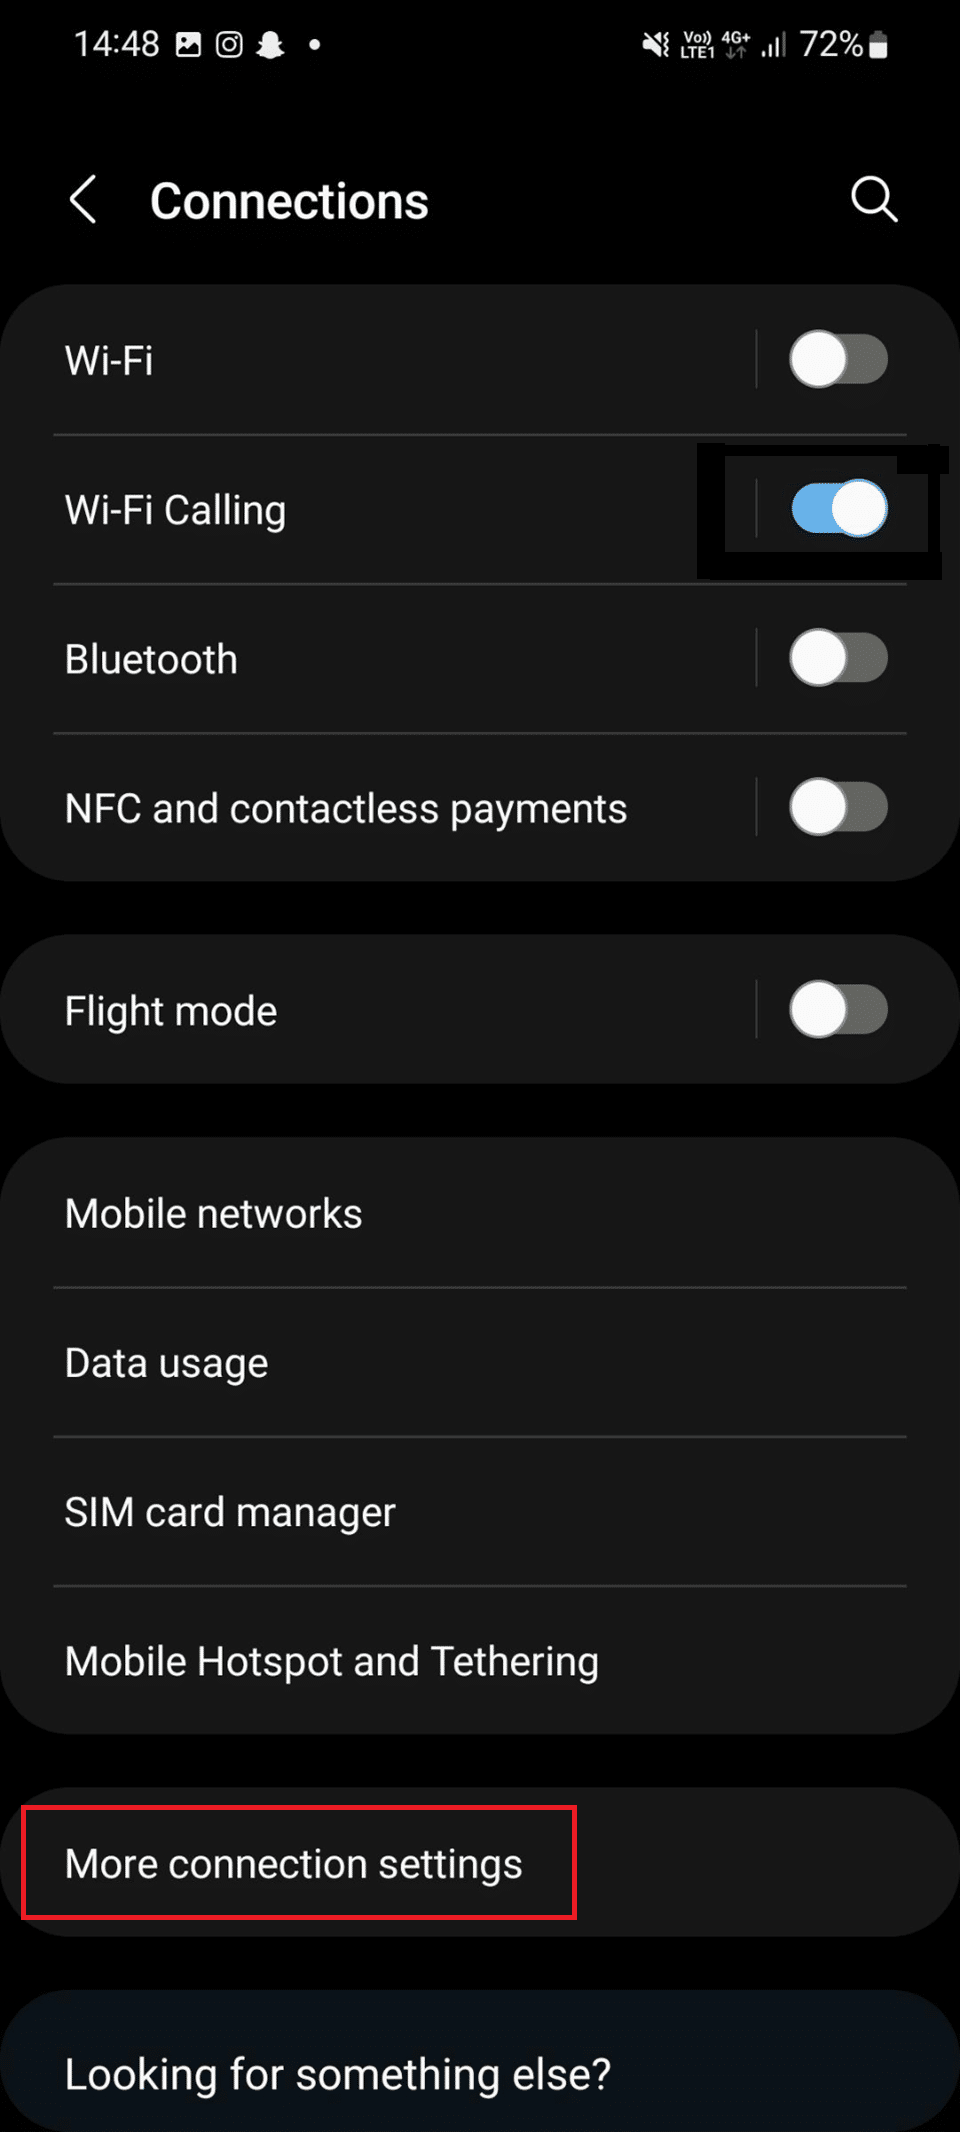 More connection settings